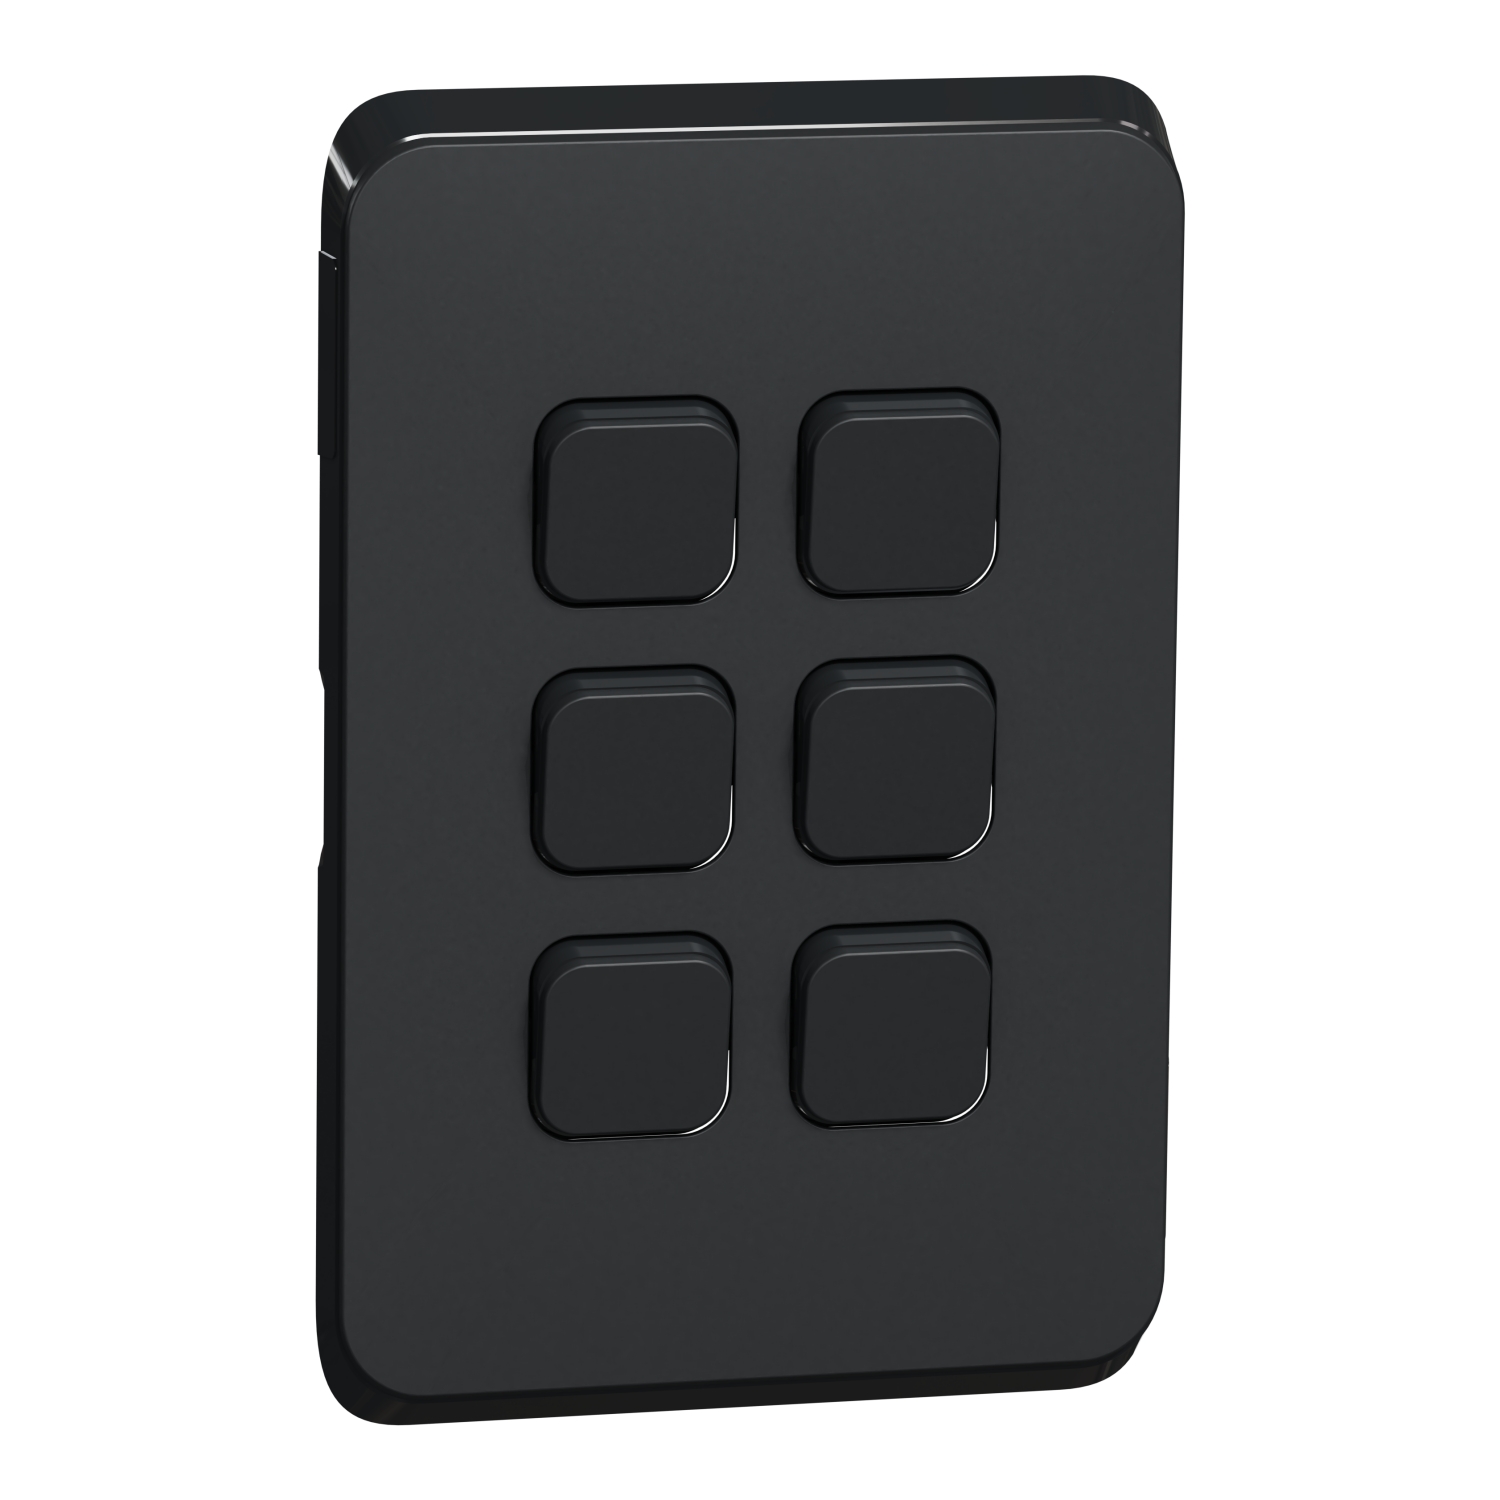 PDL Iconic - Cover Plate Switch 6-Gang - Solid Black